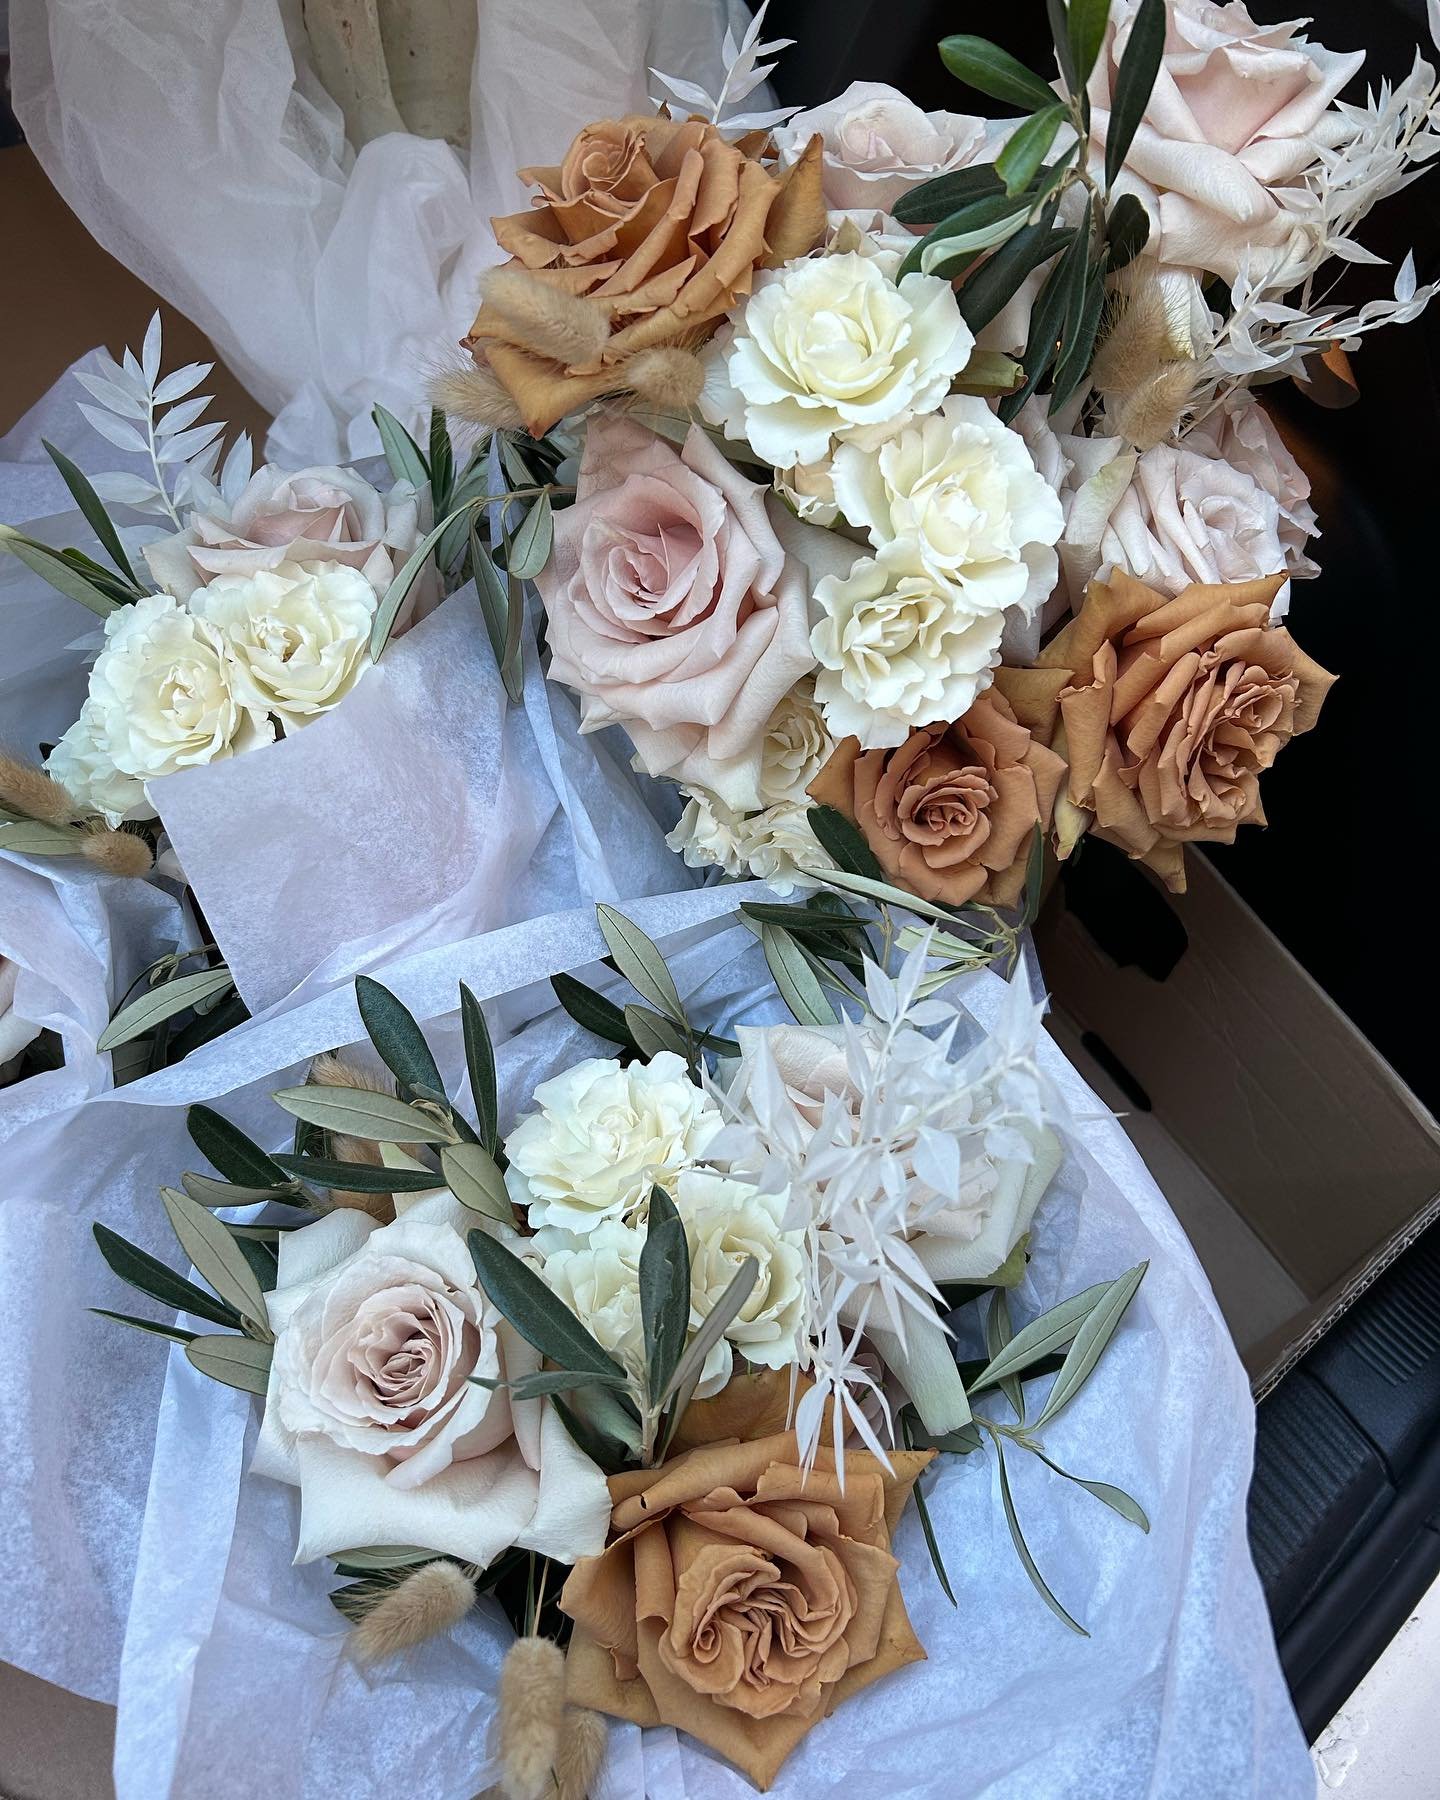 SAVE for later 🫶 for major neutral floral palette inspo 

When planning your wedding, deciding on your colour palette will help determine your whole vibe, aesthetics and other decor choices for your wedding day&hellip; 

We&rsquo;re loving neutrals 